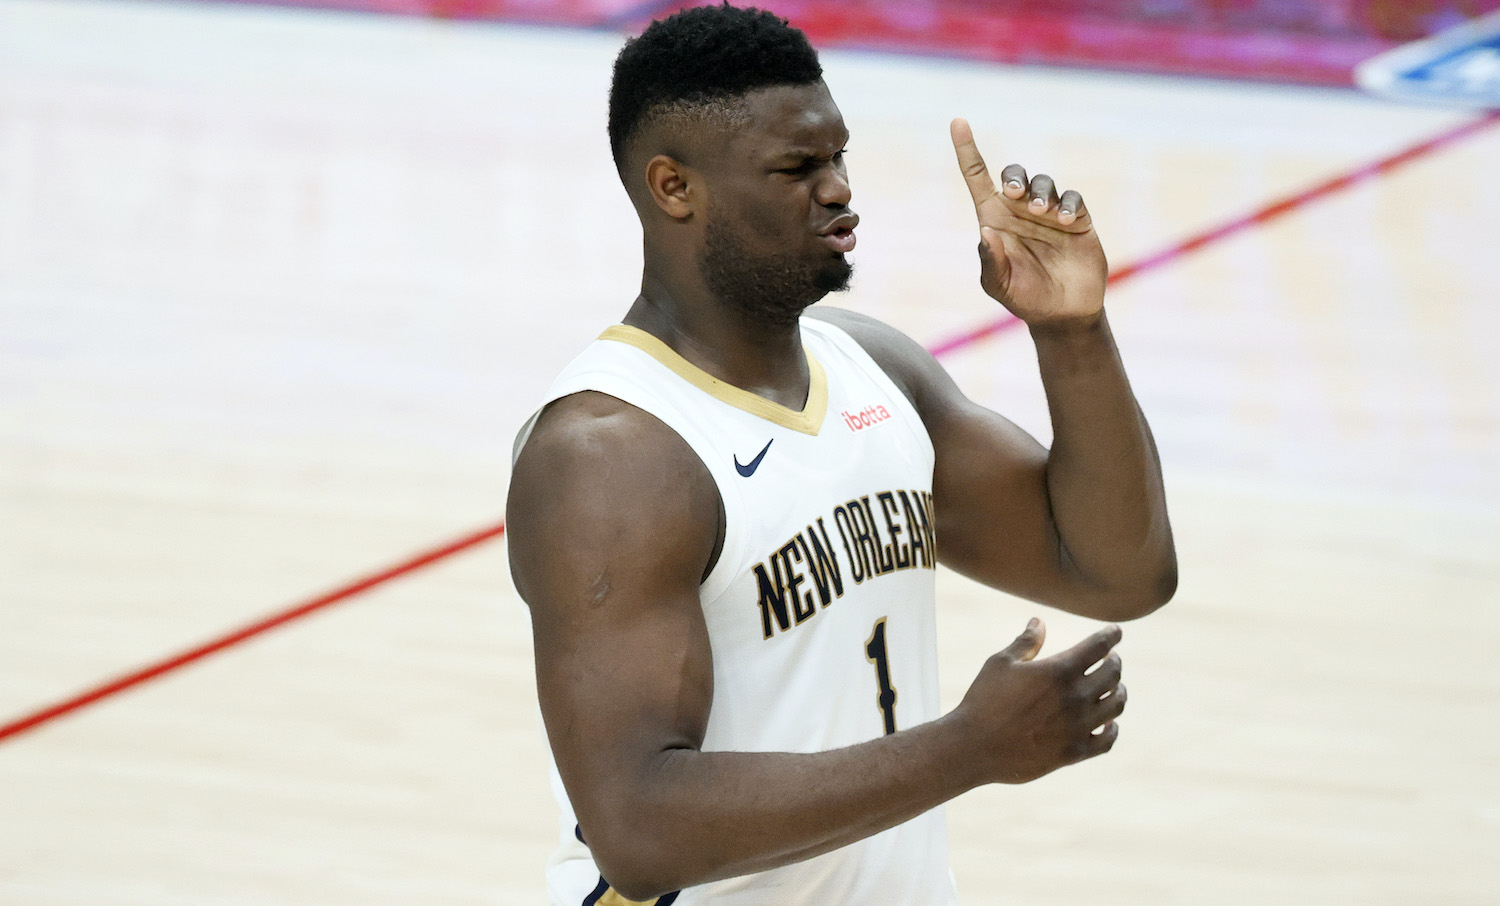 PORTLAND, OREGON - MARCH 18: Zion Williamson #1 of the New Orleans Pelicans reacts during the first quarter against the Portland Trail Blazers at Moda Center on March 18, 2021 in Portland, Oregon. NOTE TO USER: User expressly acknowledges and agrees that, by downloading and or using this photograph, User is consenting to the terms and conditions of the Getty Images License Agreement. (Photo by Steph Chambers/Getty Images)